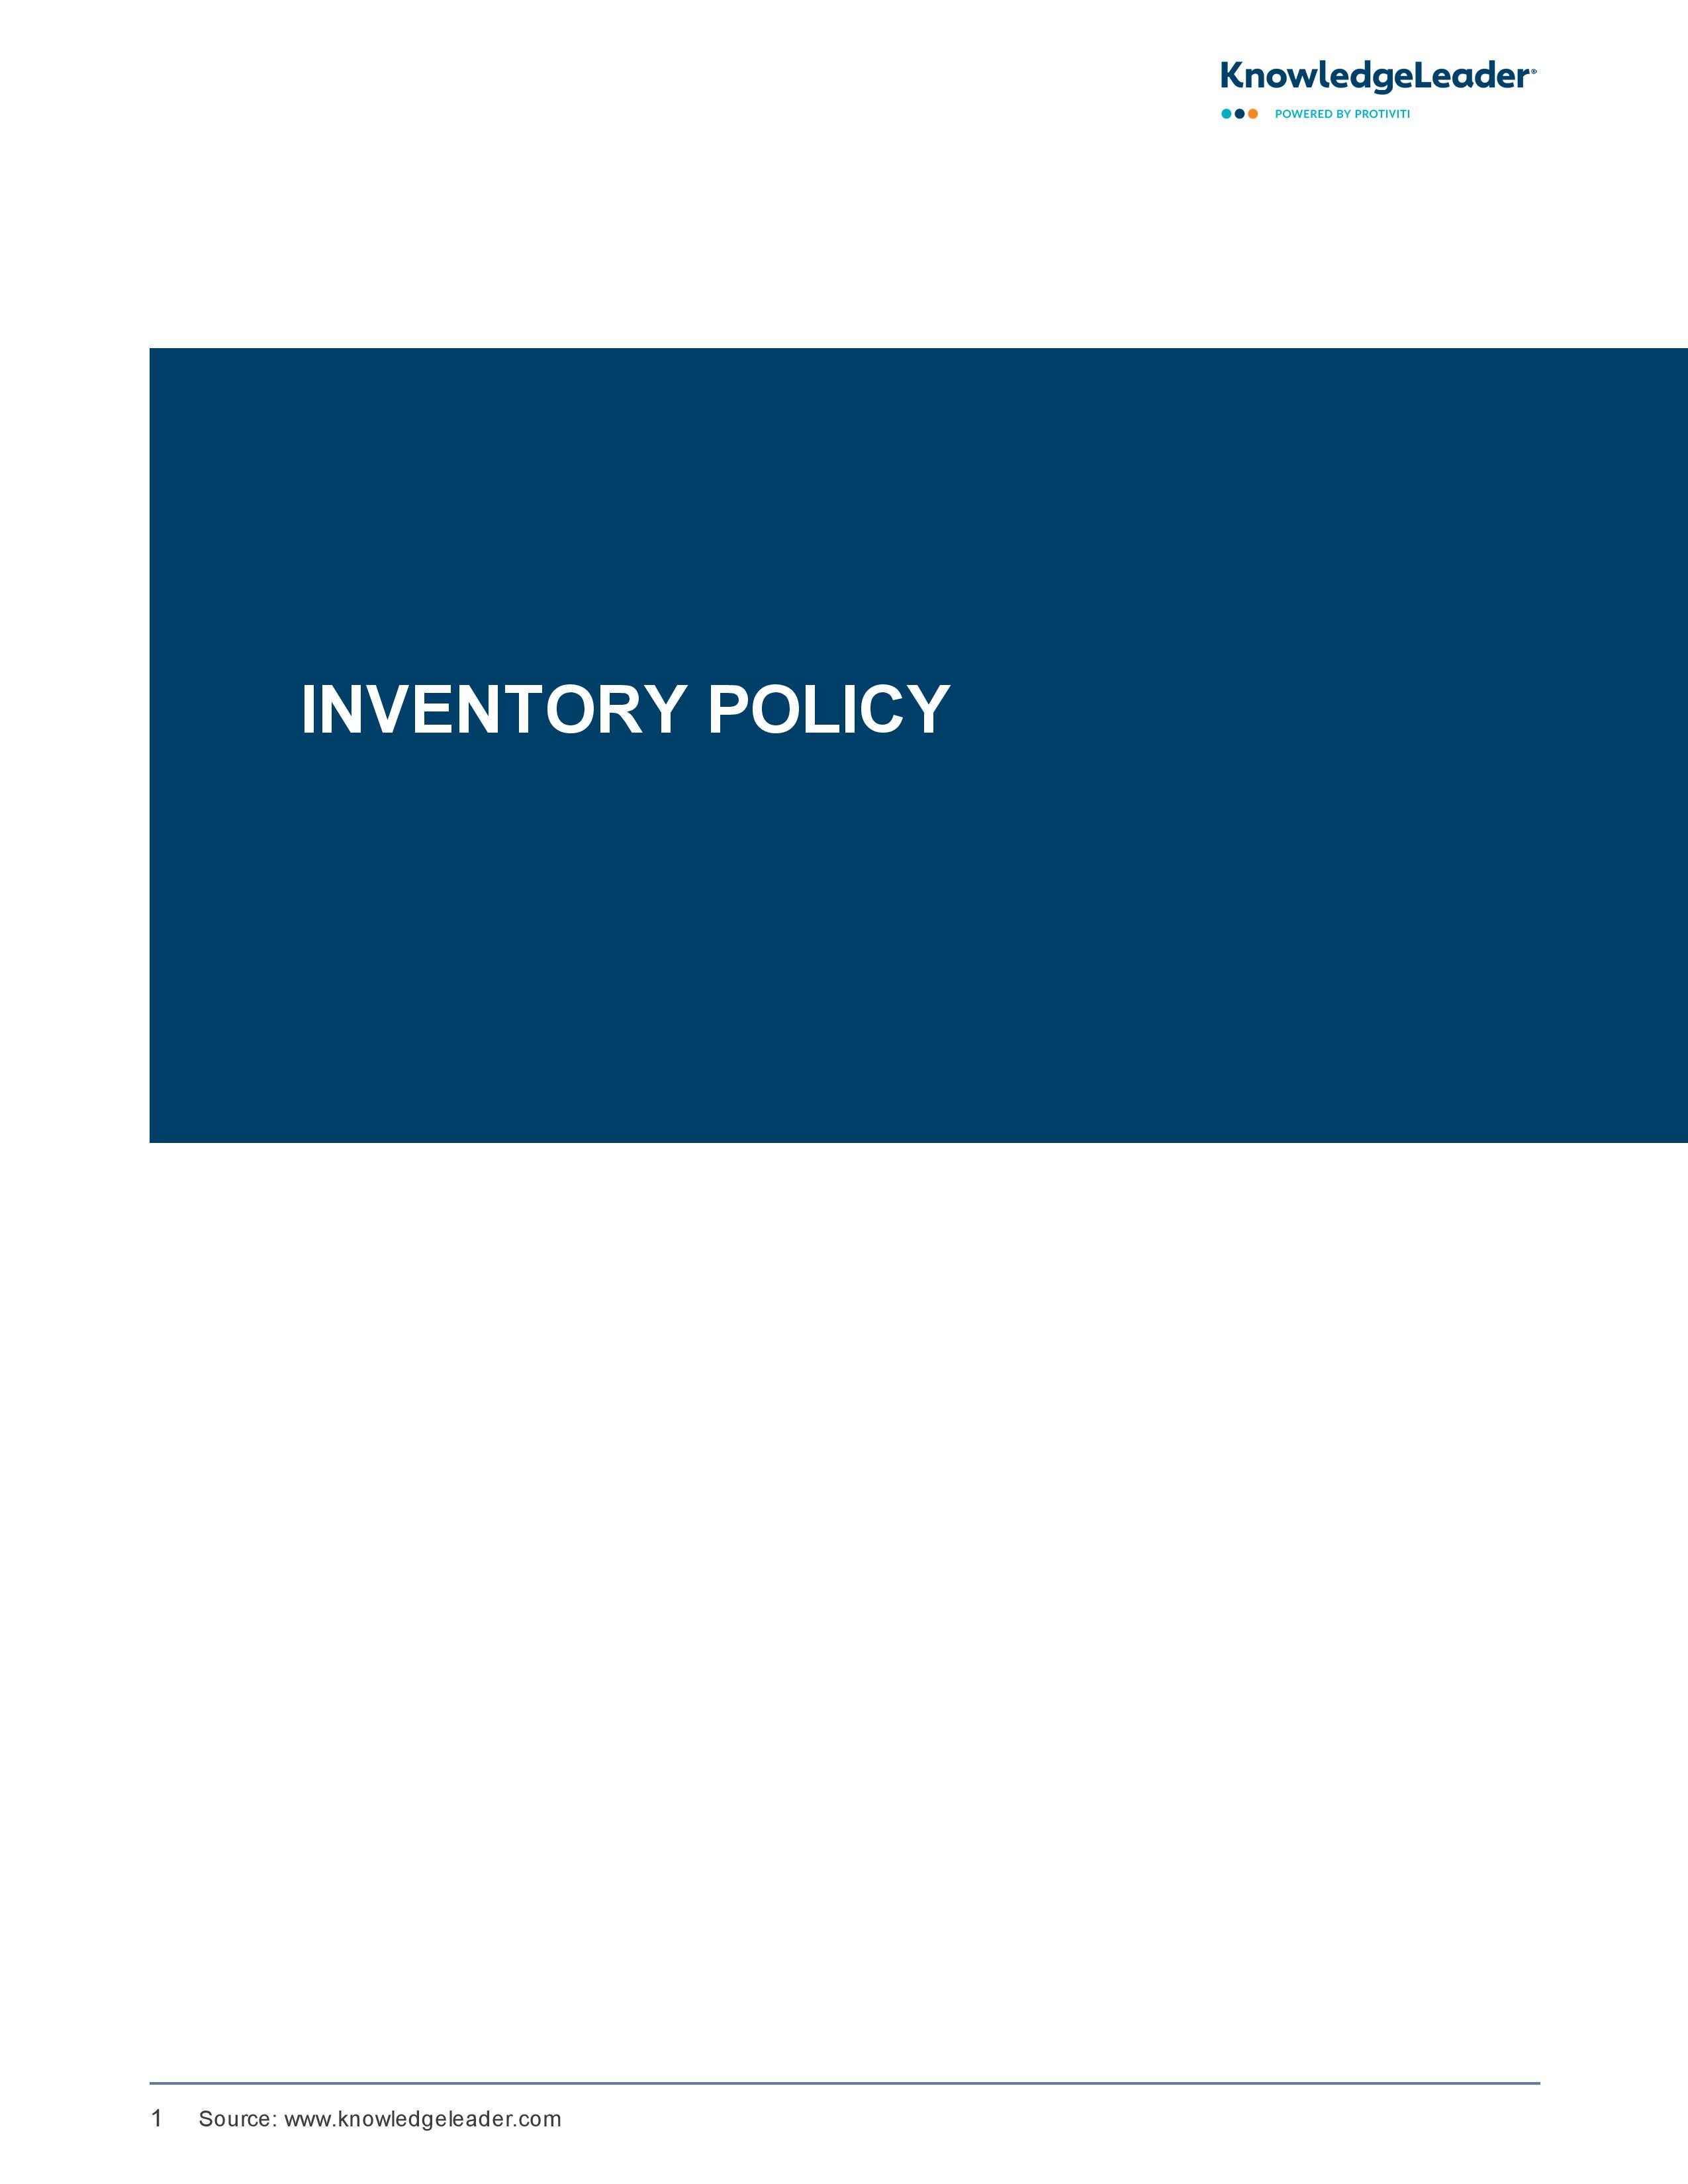 screenshot of the first page of Inventory Policy